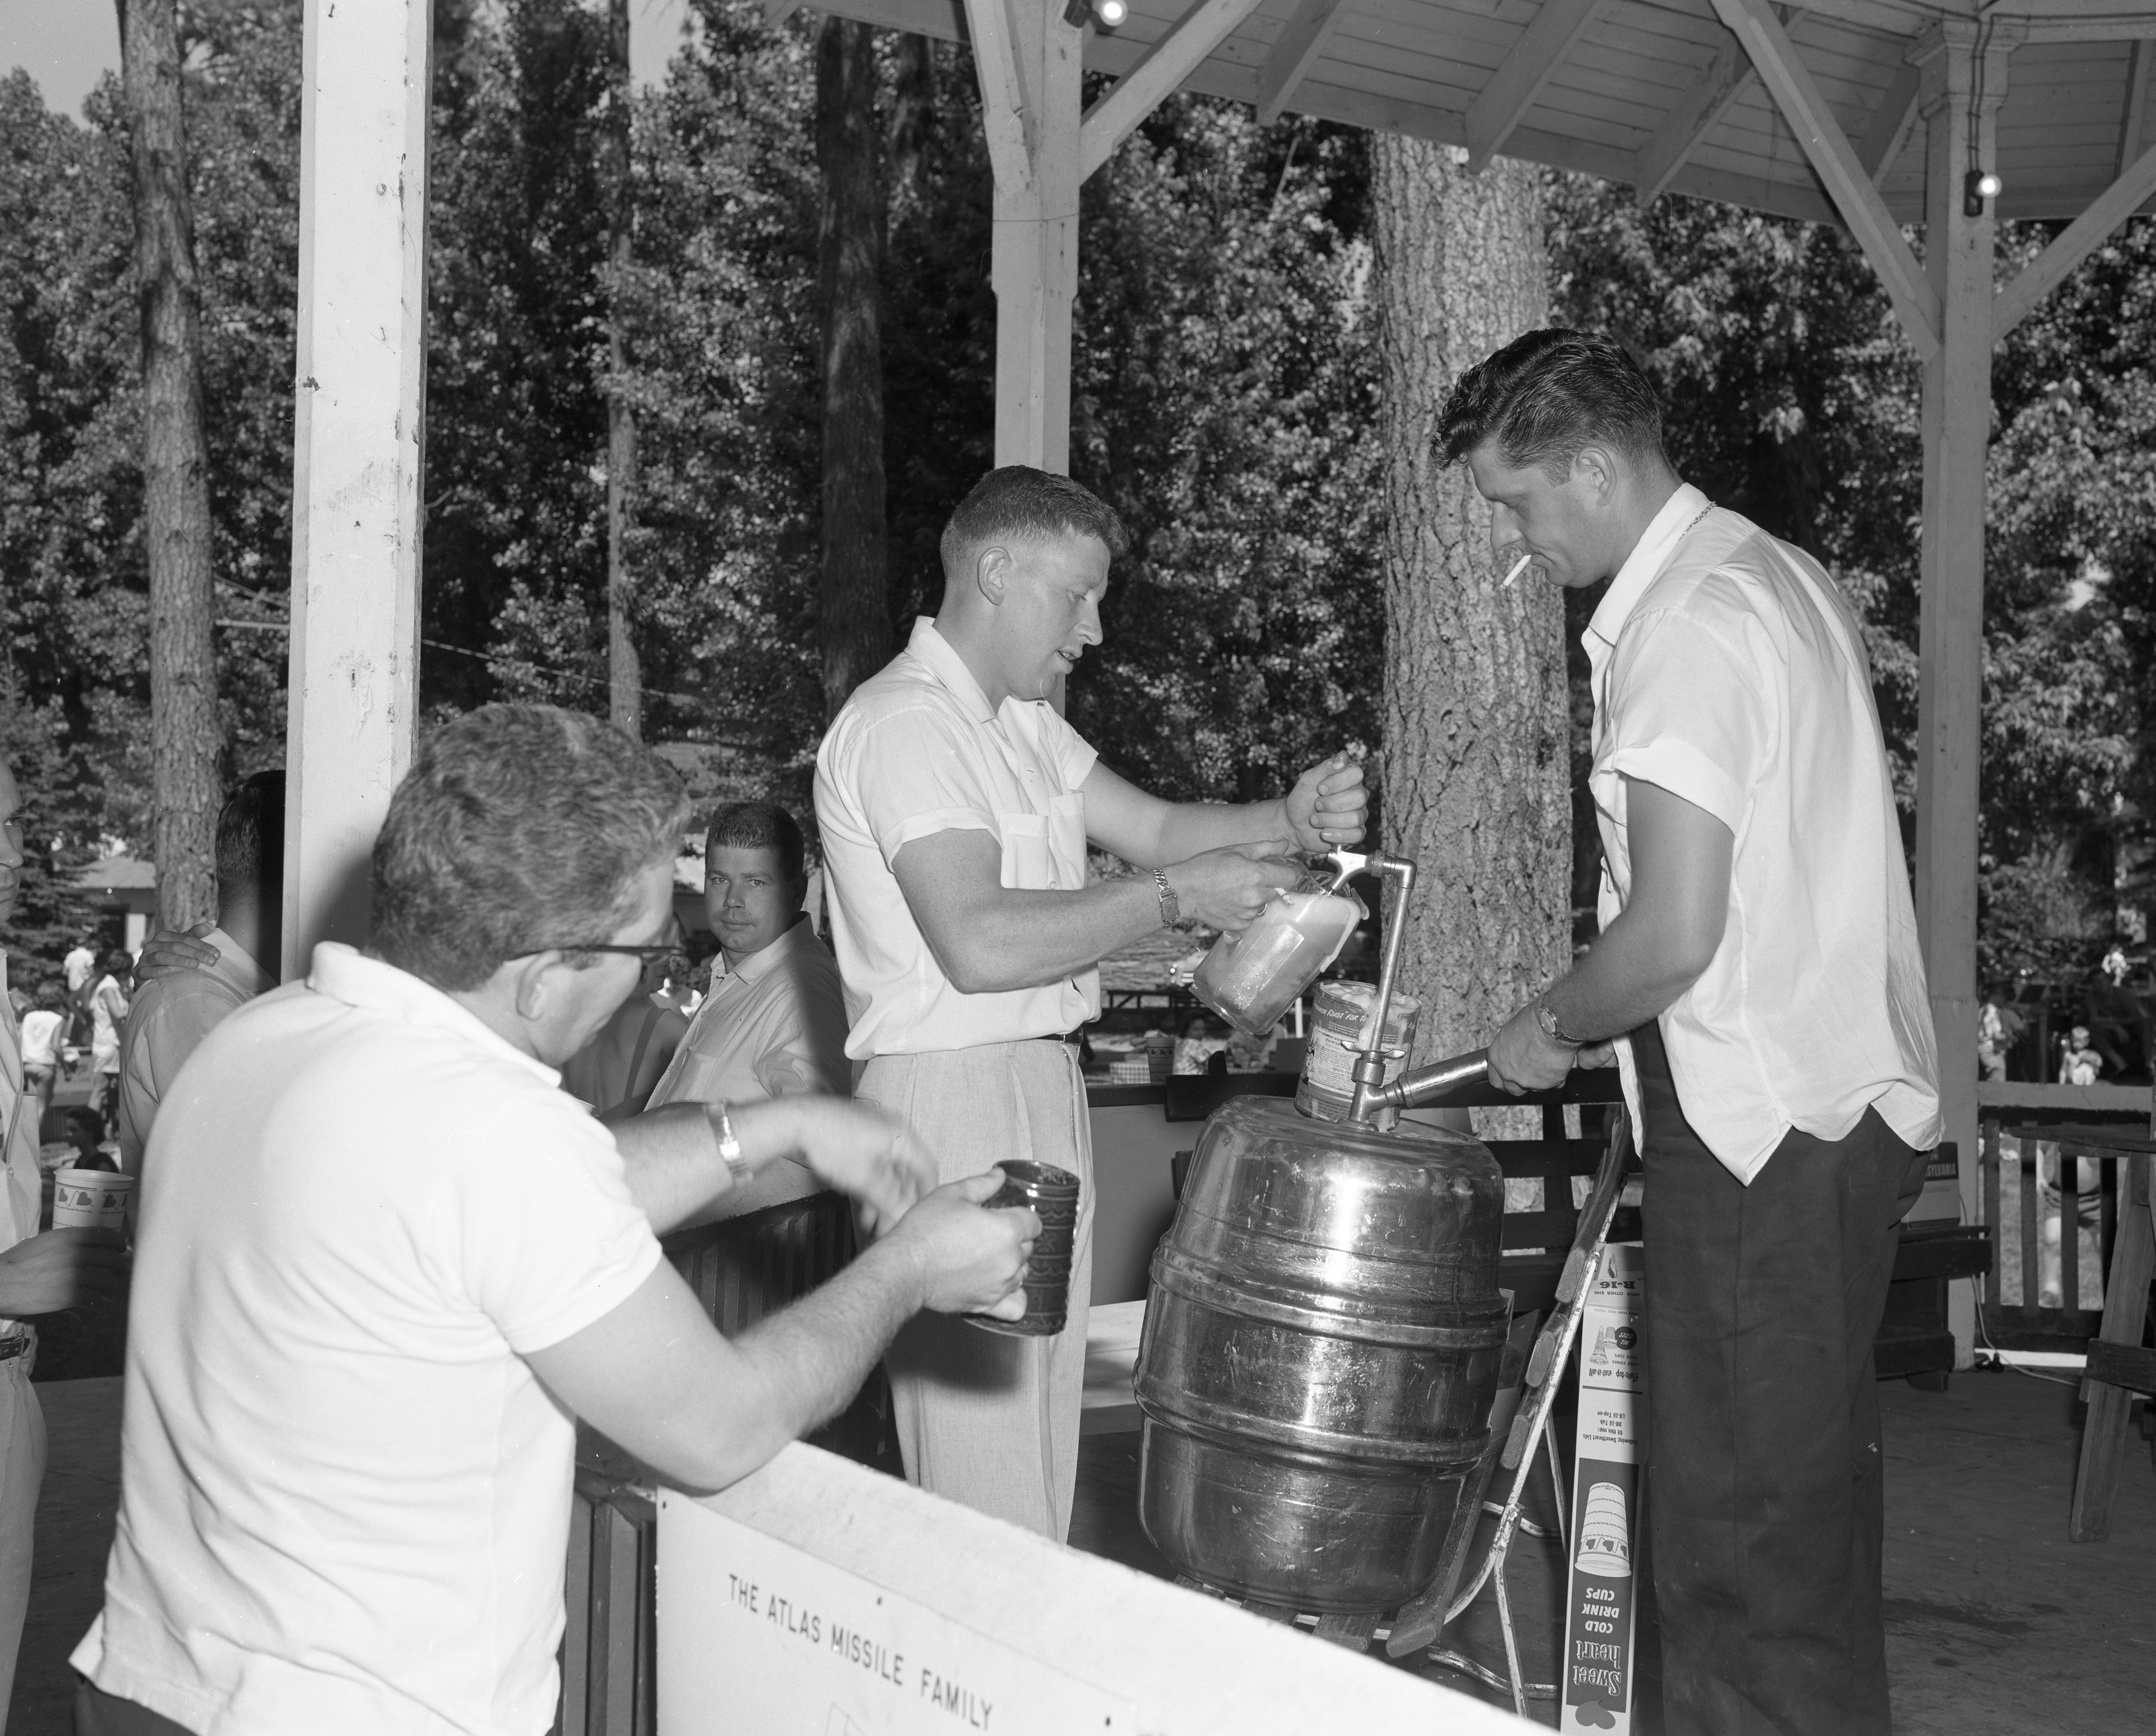 The draft beer committee ensuring that people have refreshments during the picnic